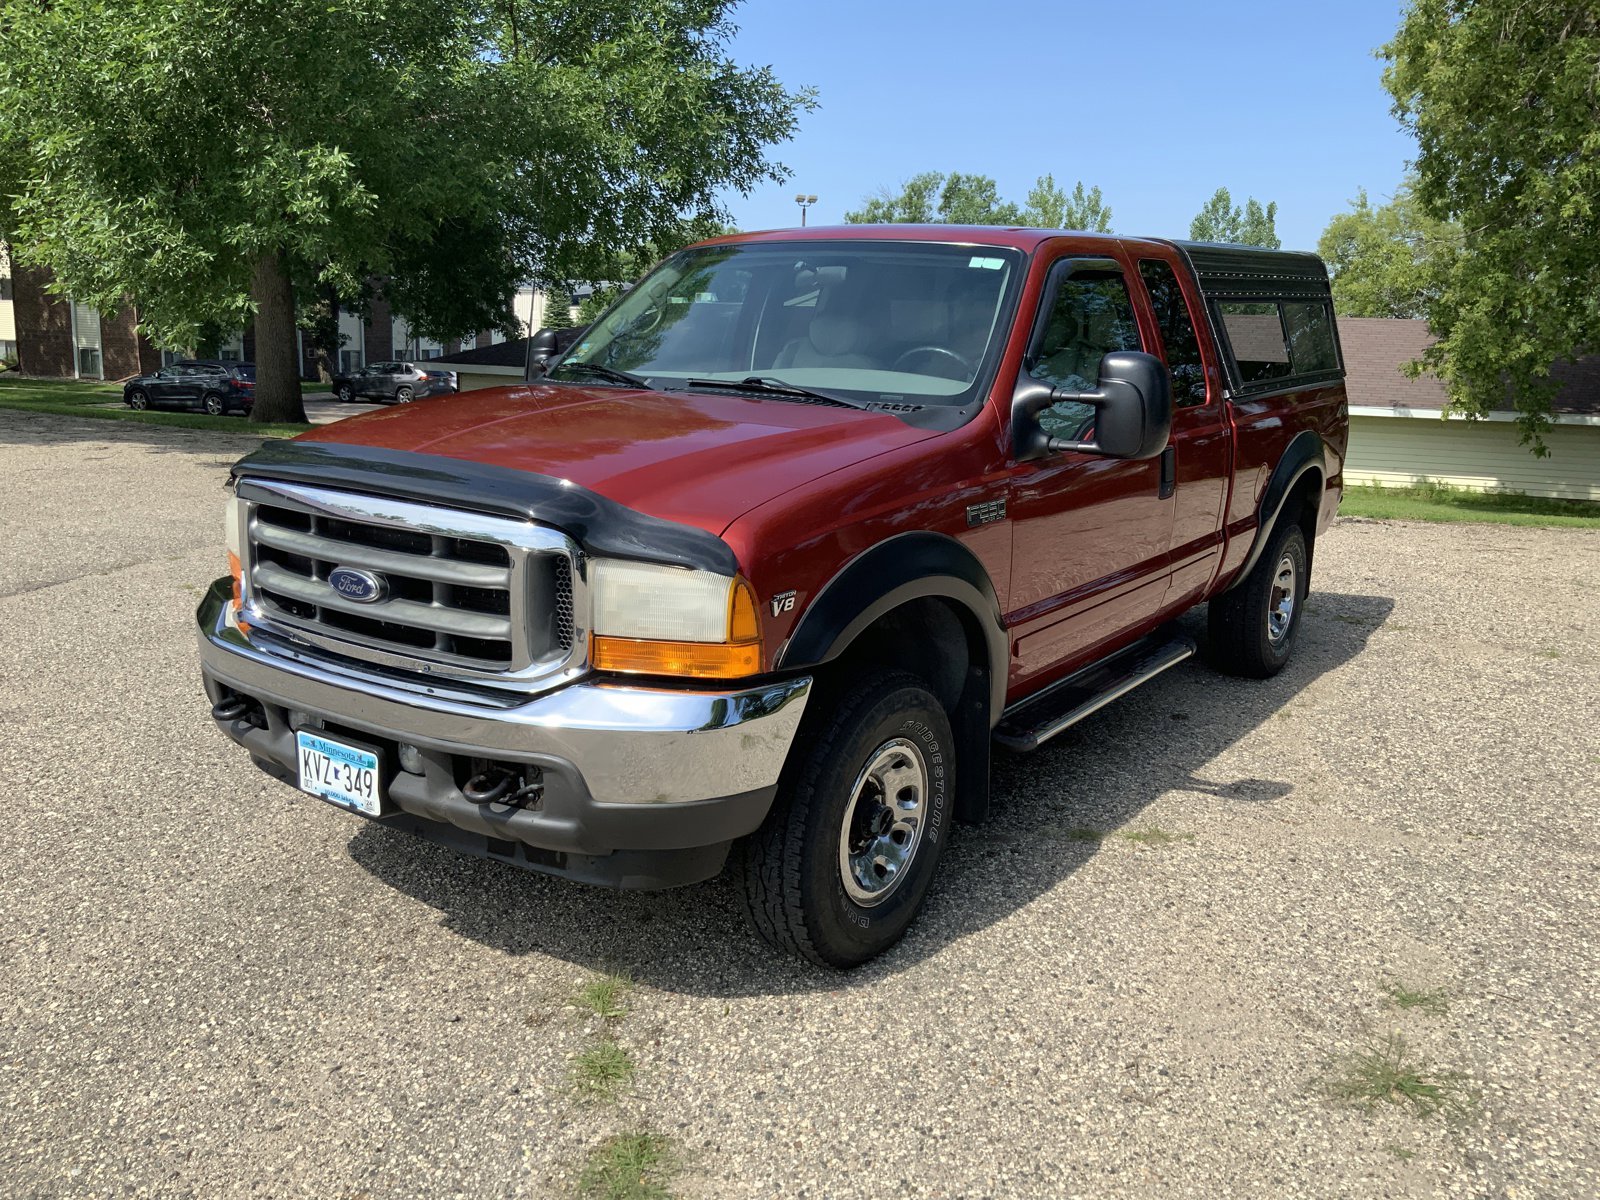 Used 2001 Ford F-250 Super Duty XLT with VIN 1FTNX21L91EA84765 for sale in Alexandria, Minnesota